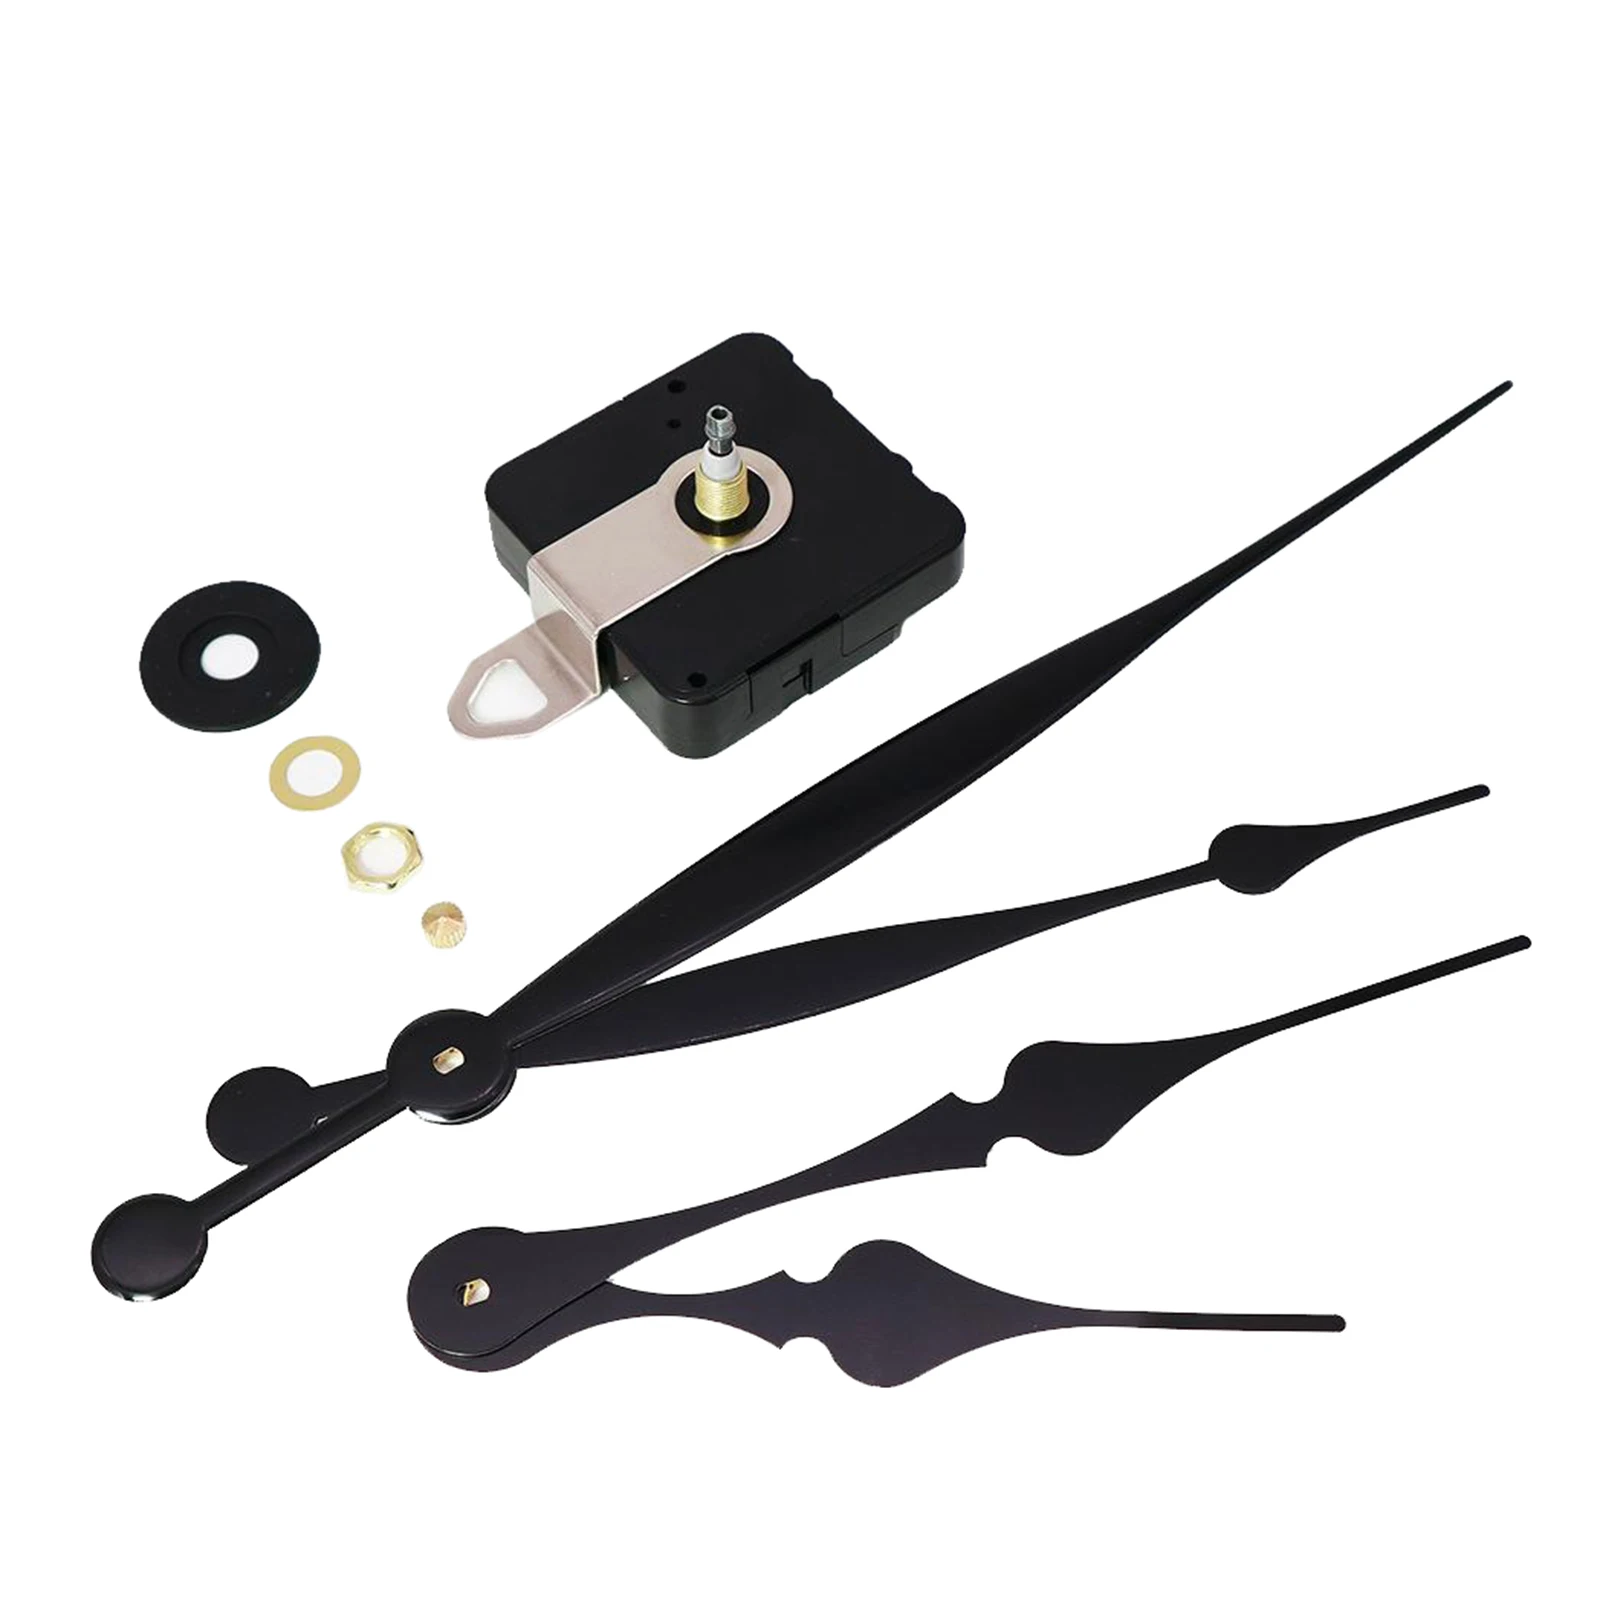 DIY Wall Clock Movement Mechanism Repair Parts 20mm Shaft Non-Ticking, Durable Material, 5mm Max Dial Thickness